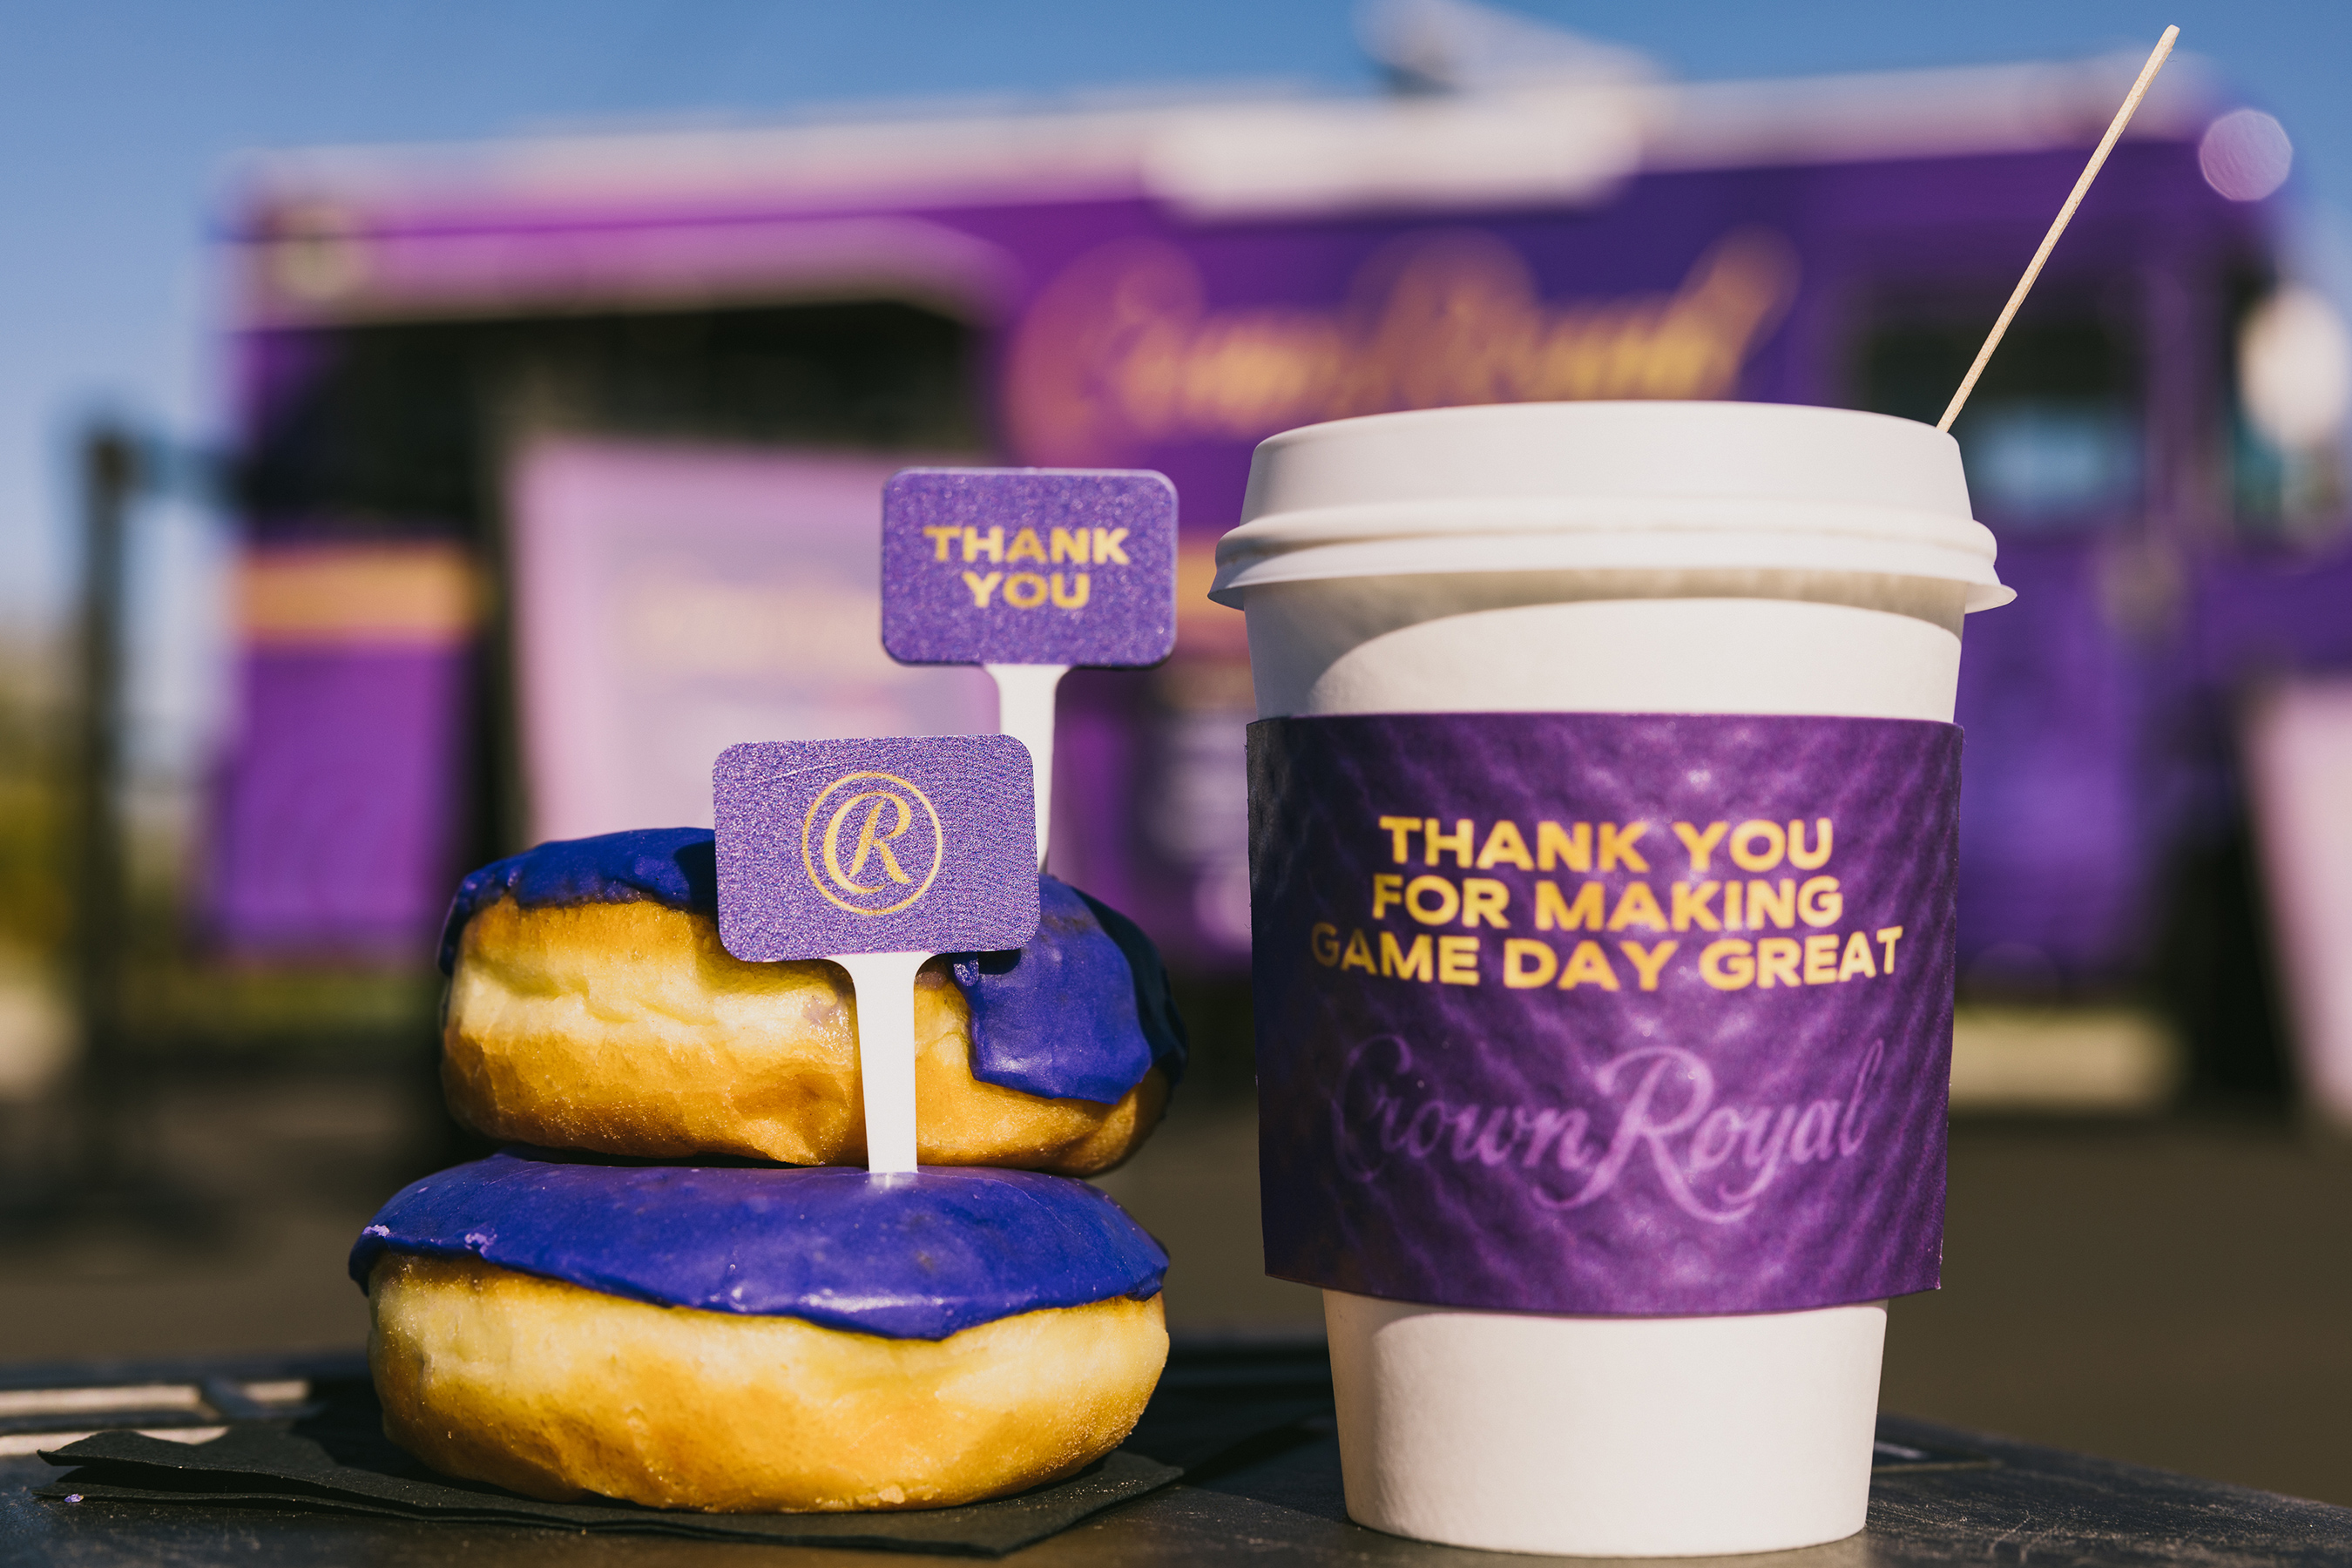 The Crown Royal Generosity Food Truck served its “Gratitude Menu,” to hospitality members, including  freshly brewed coffee and an exclusive Crown Royal-inspired purple donut.